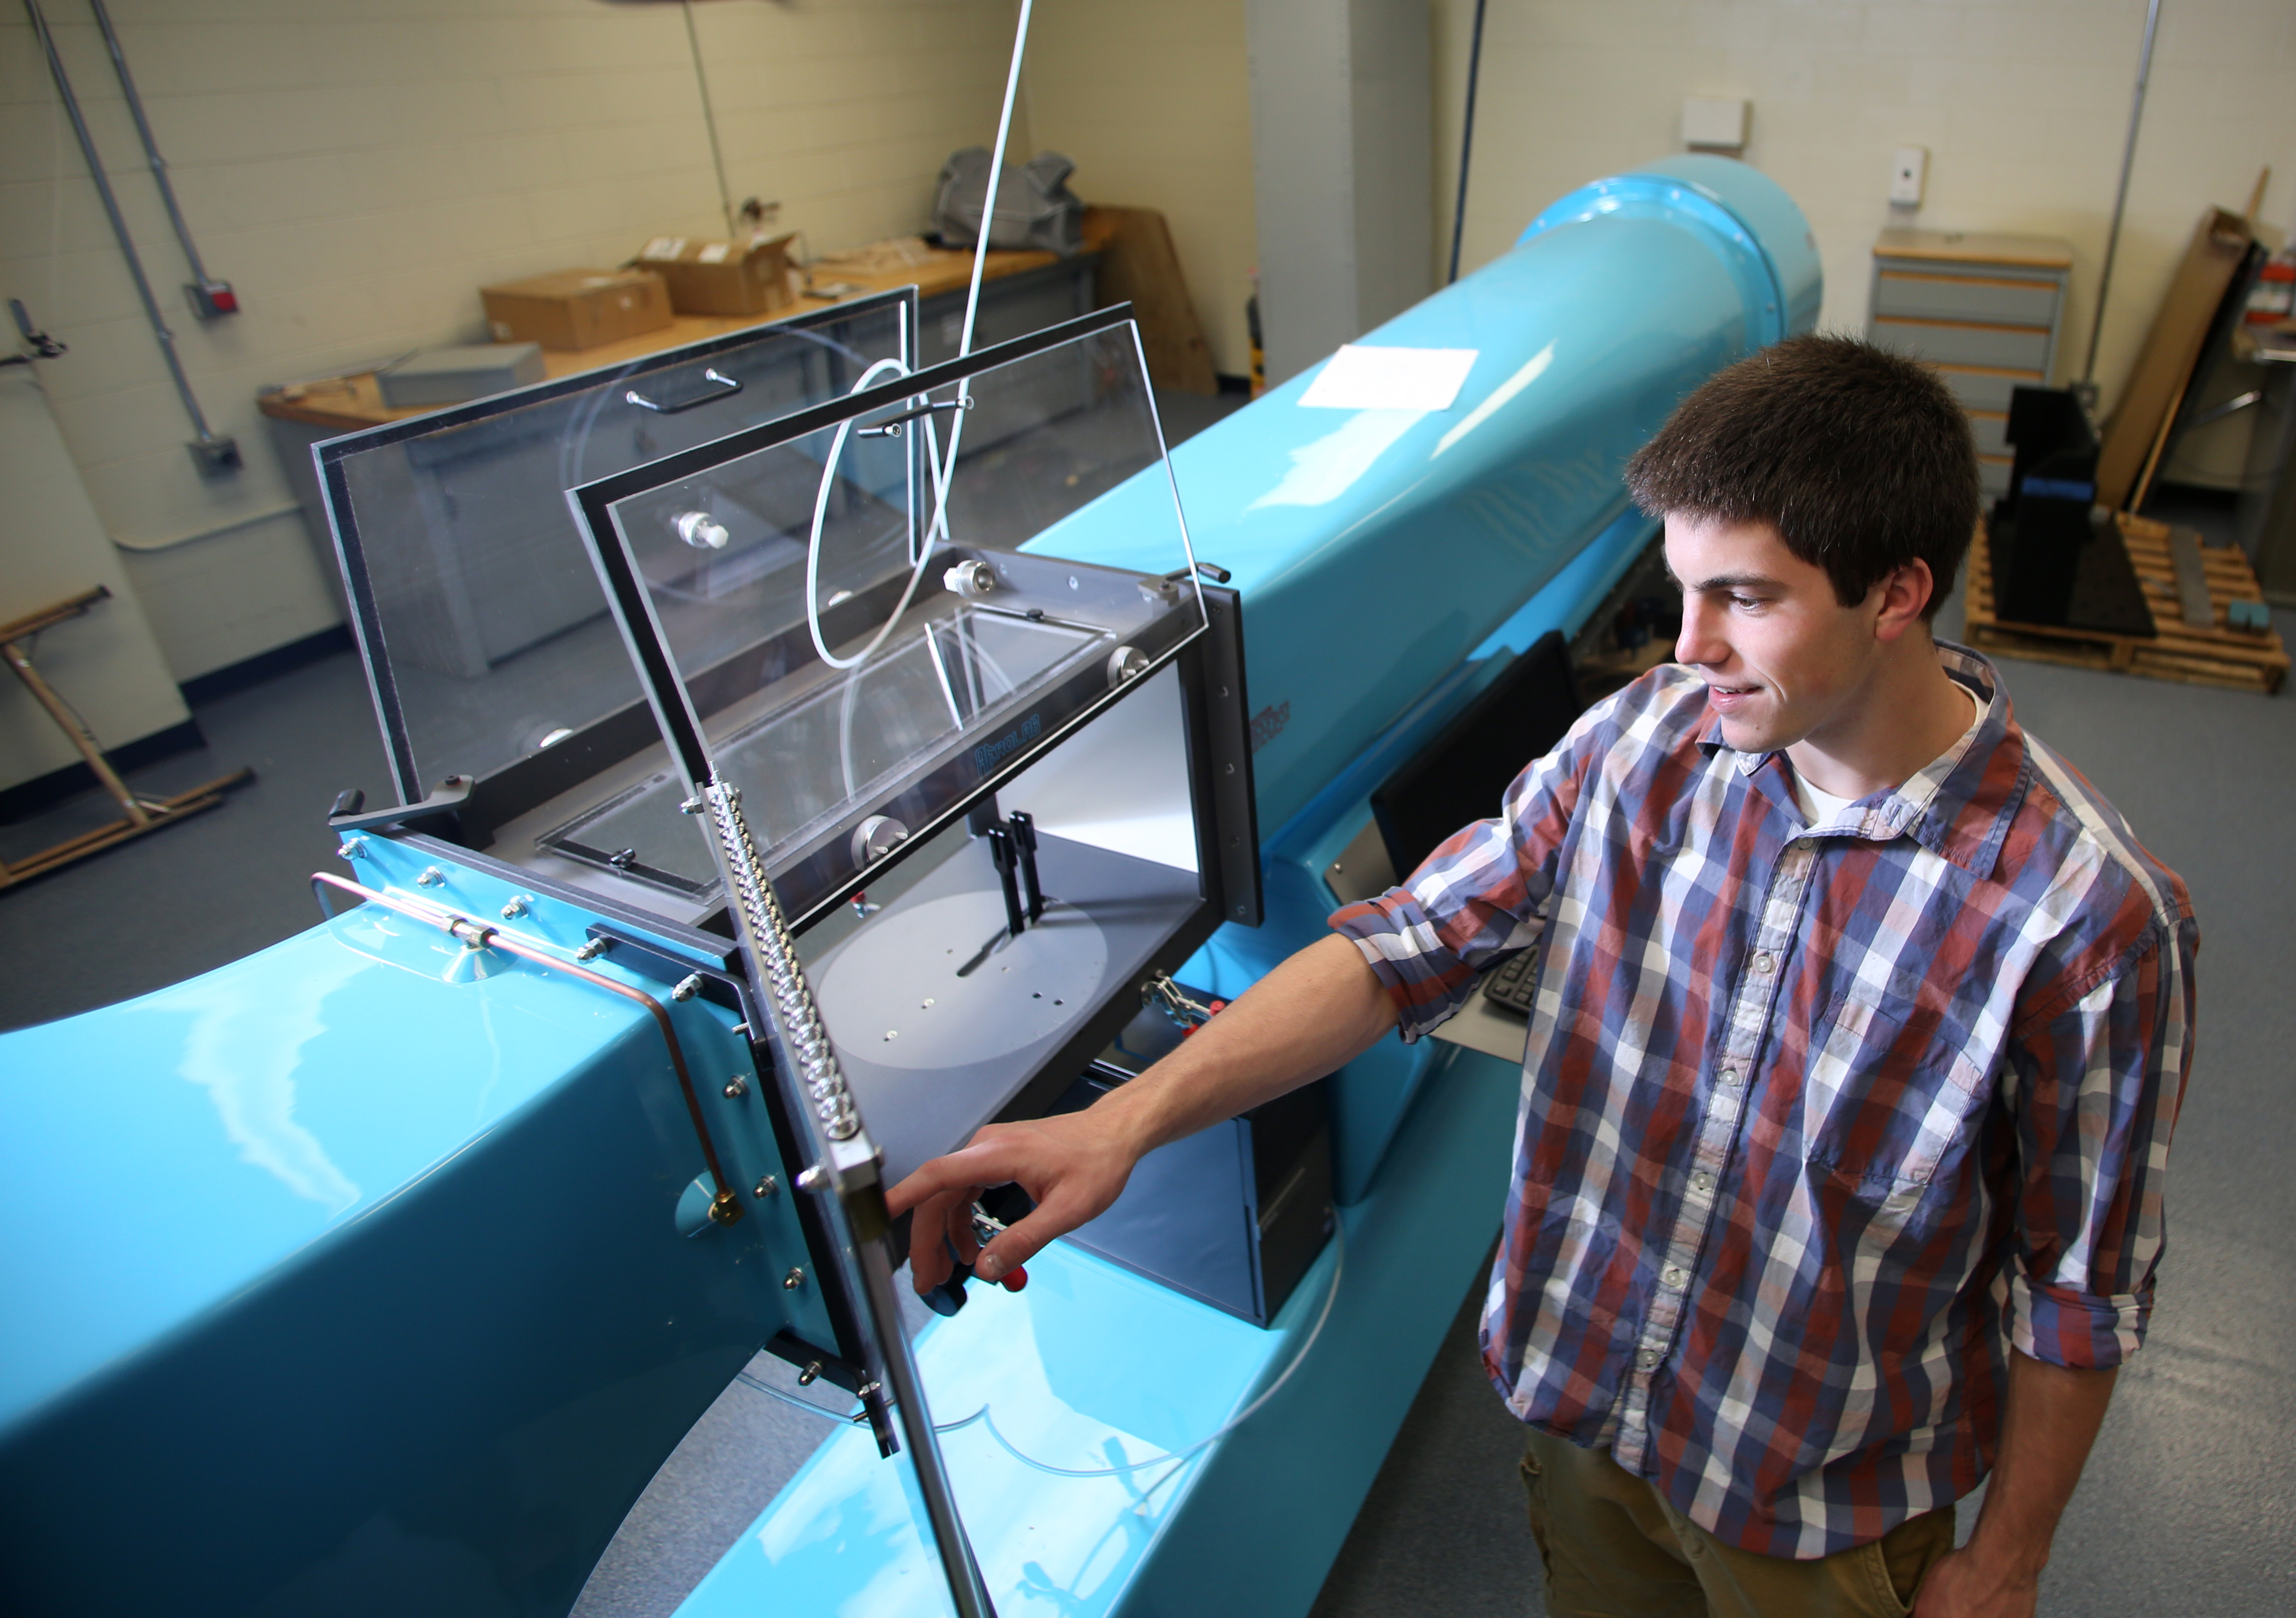 Student engages with wind tunnel equipment